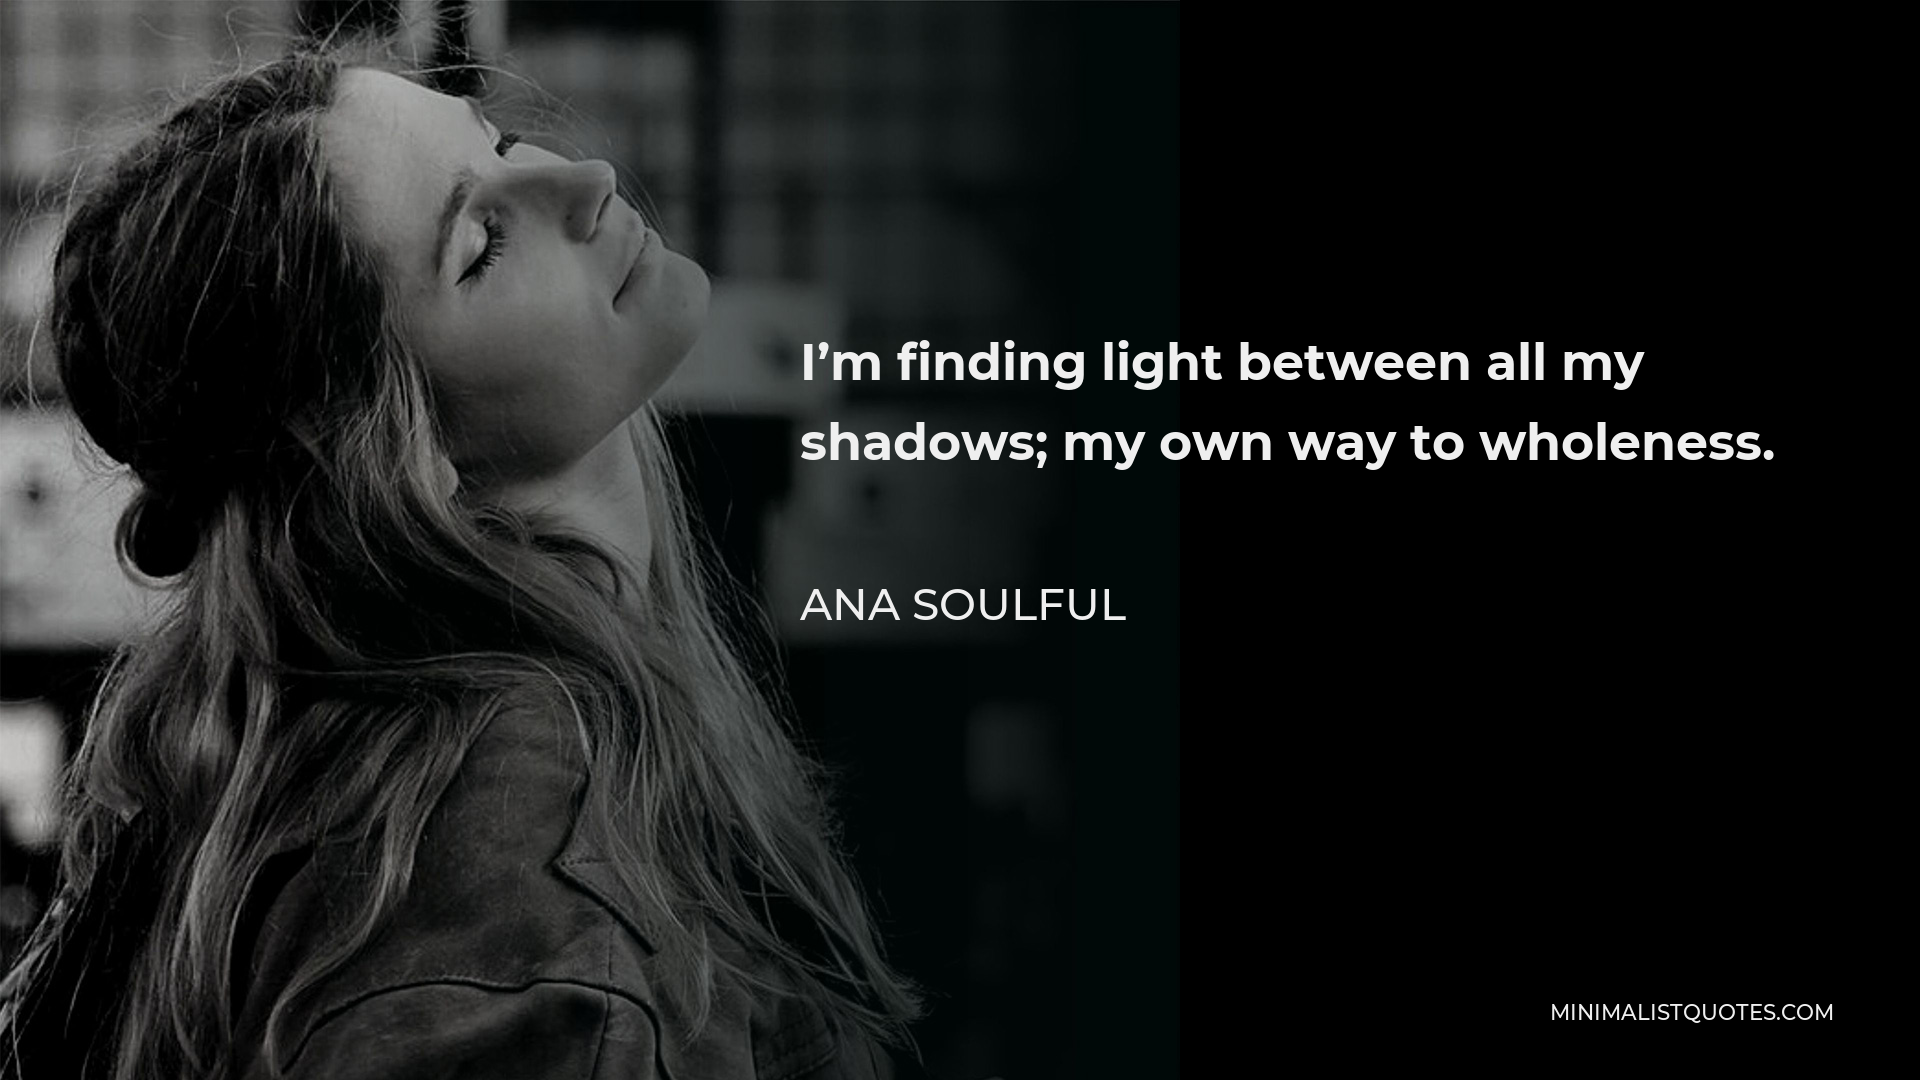 Ana Soulful Quote - I’m finding light between all my shadows; my own way to wholeness.